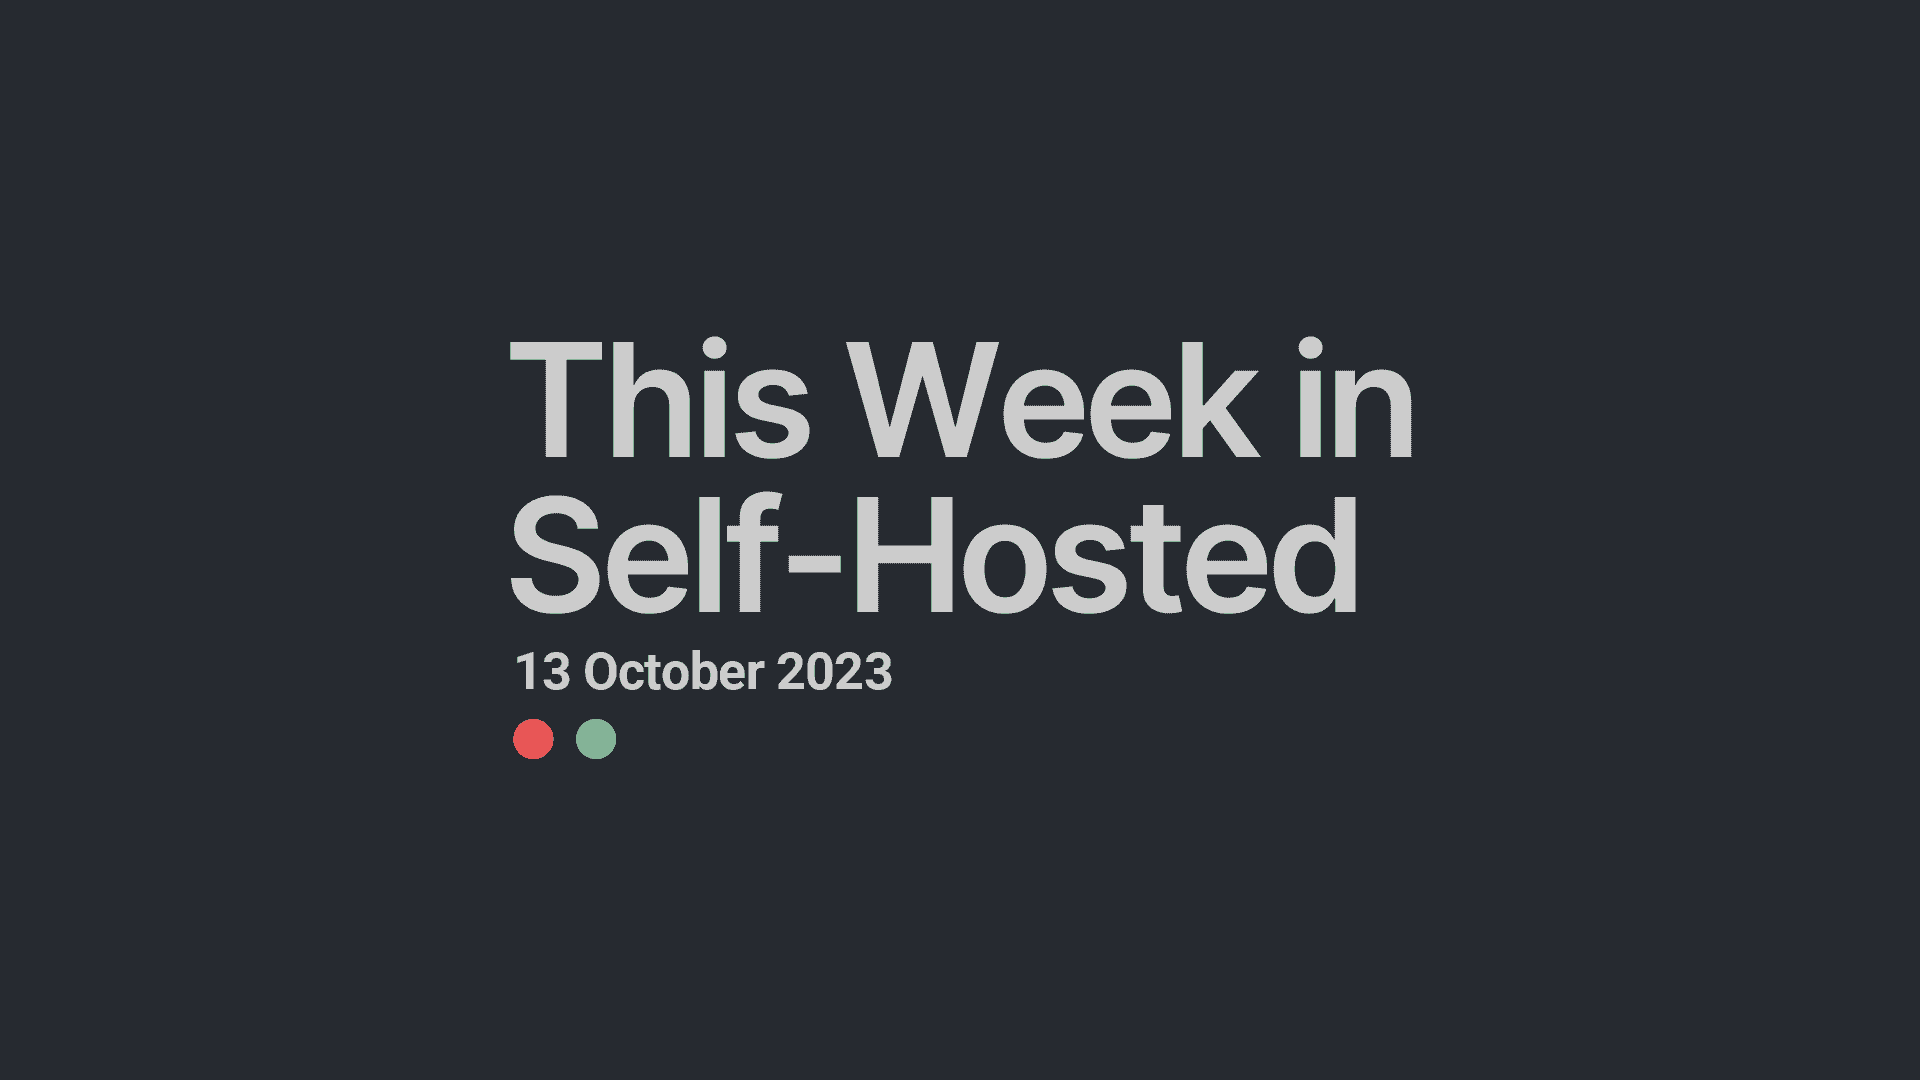 This Week in Self-Hosted (13 October 2023) Post image